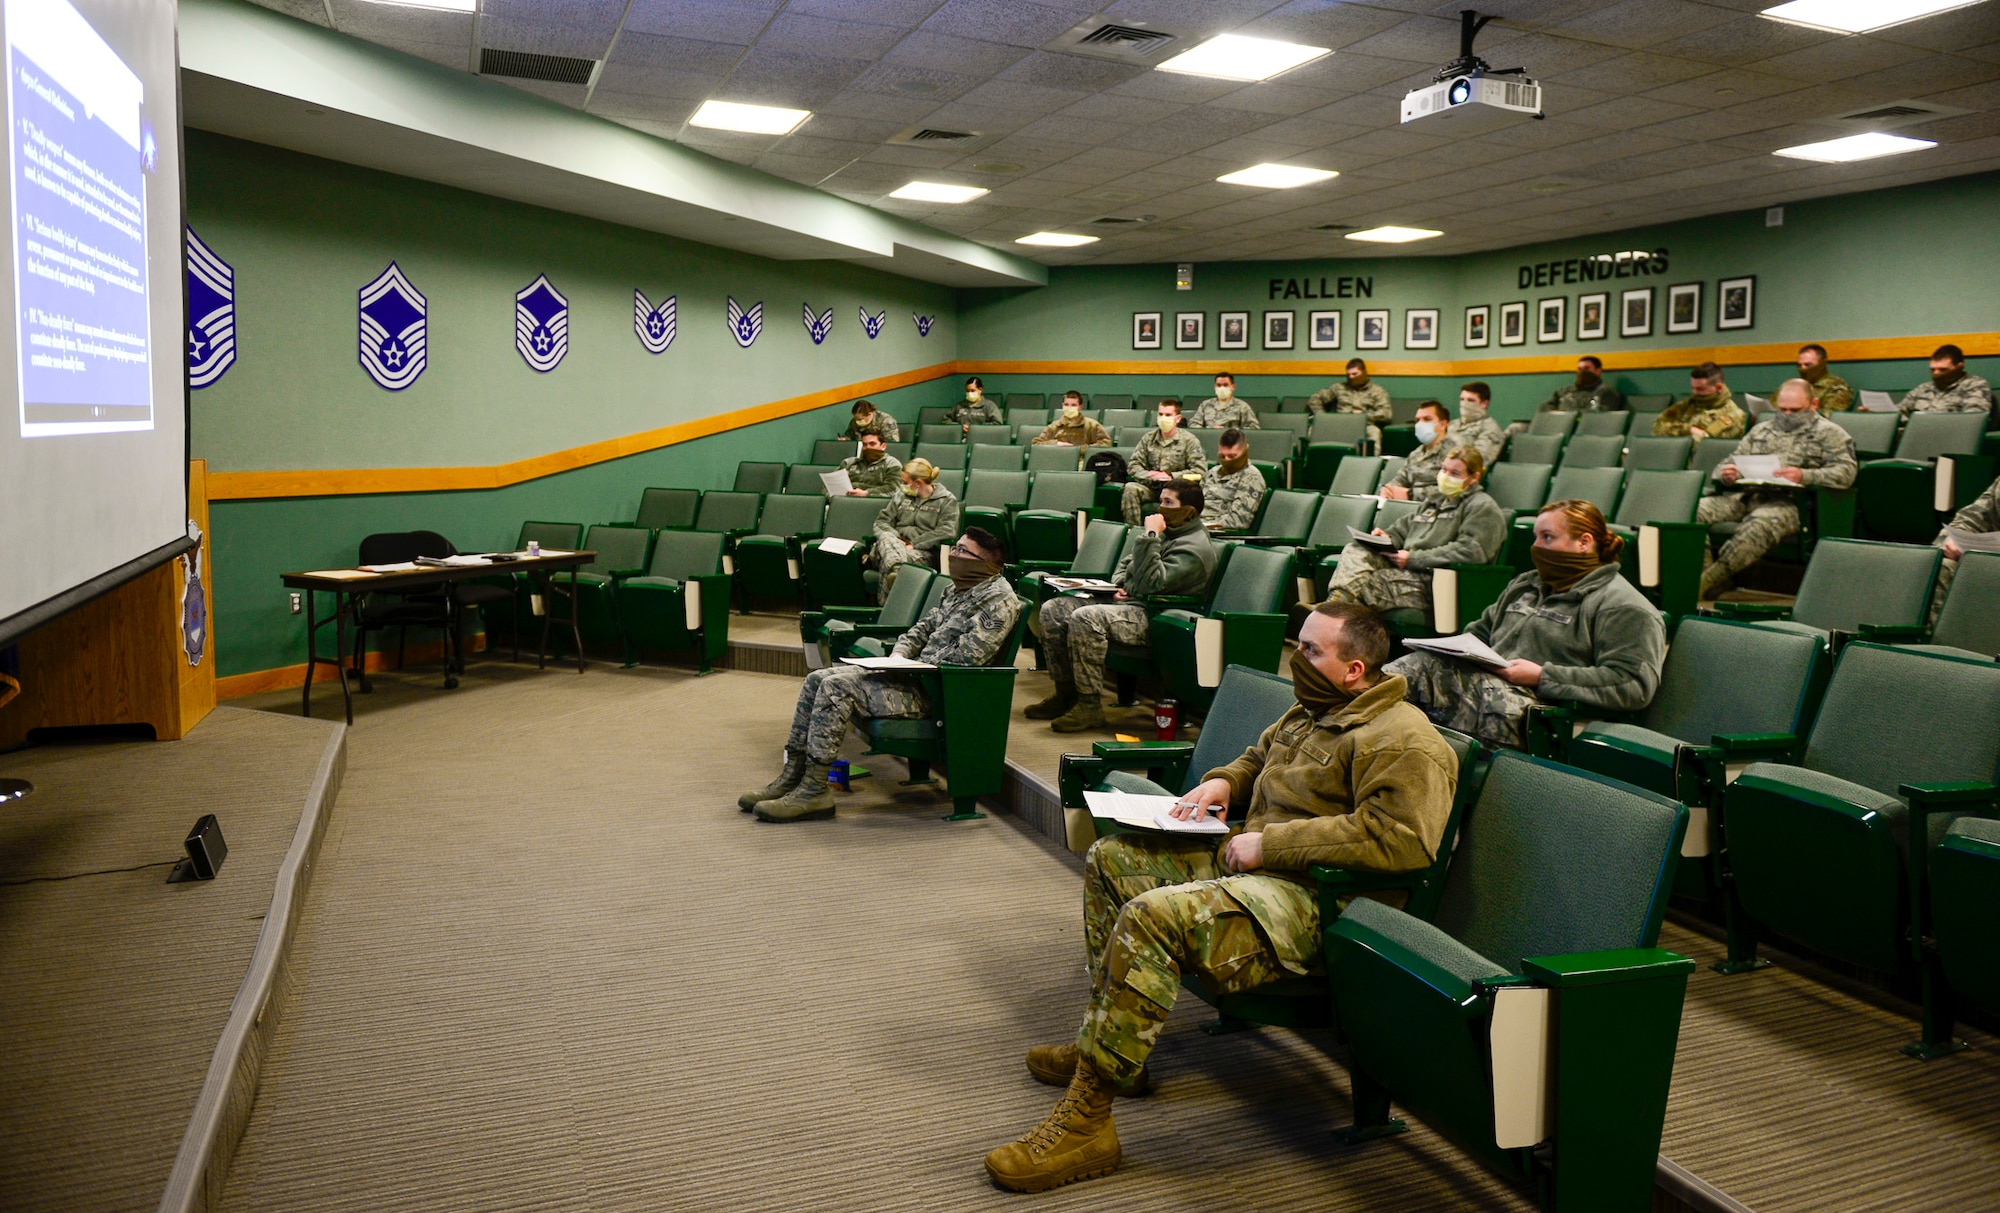 Airmen with the 157th Security Forces Squadron train remotely with the N.H. police academy by videoconference on basic law enforcement topics at Pease Air national Guard Base.